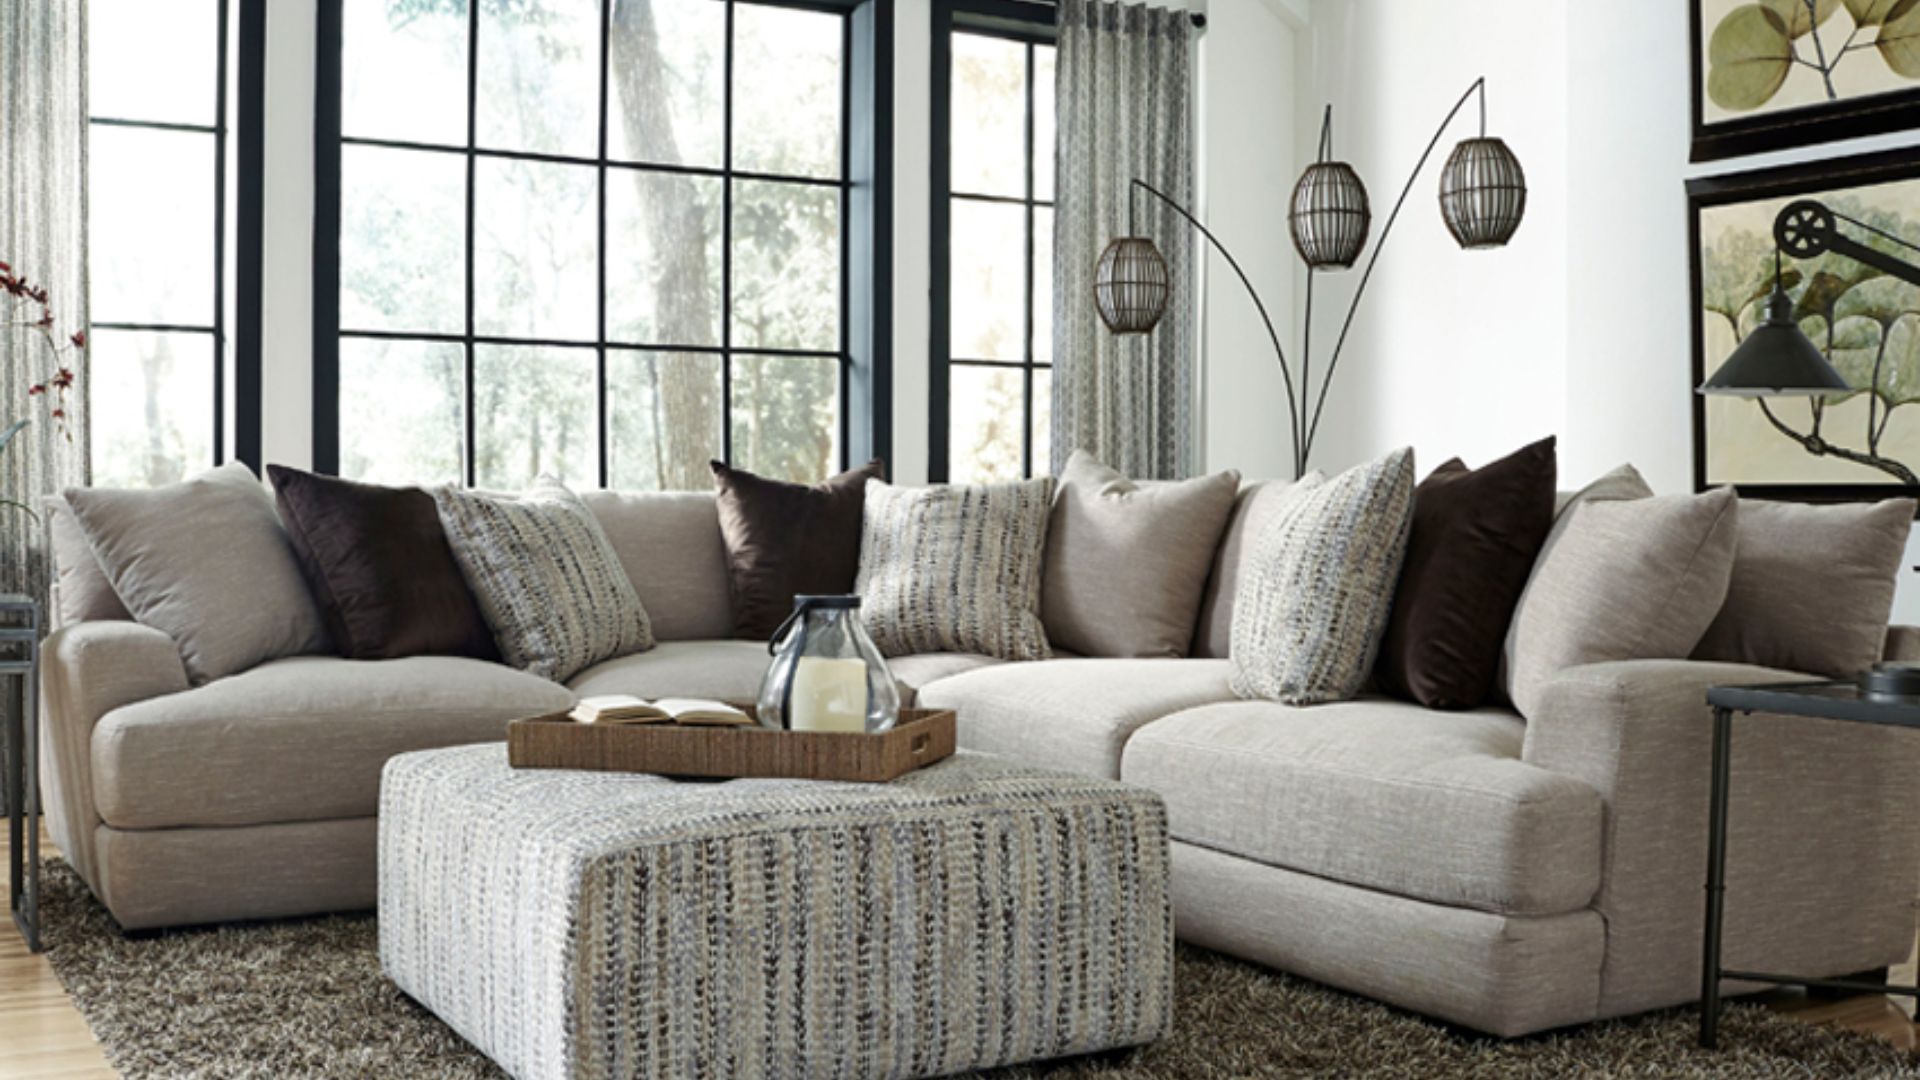 Choose the Right Upholstery Color for Your Sofa